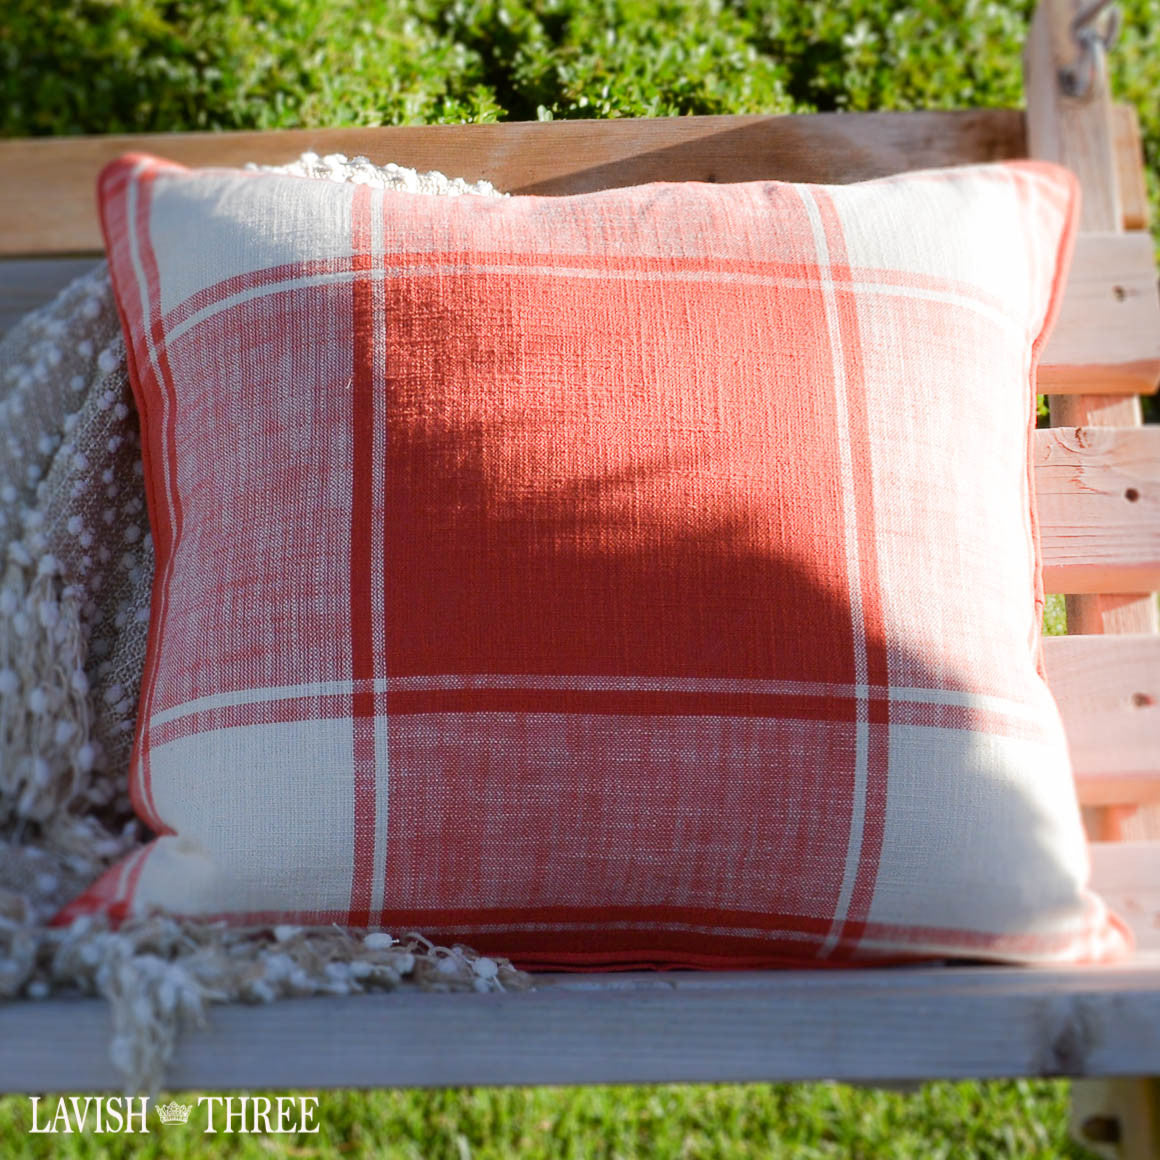 Large window pane plaid throw accent pillow in ivory and coral Lavish three 3